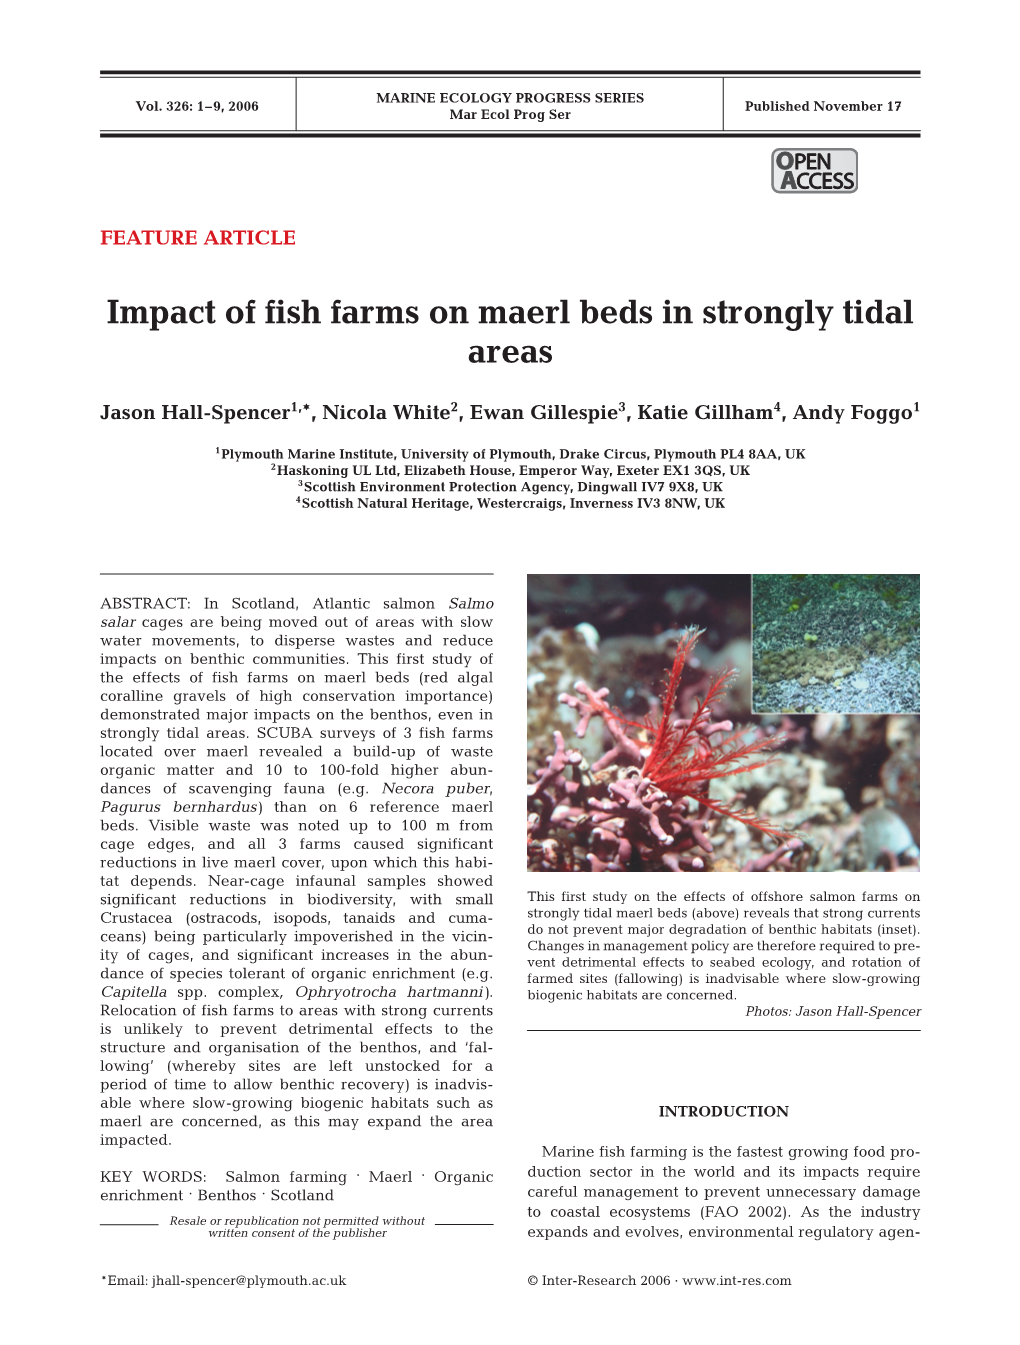 Impact of Fish Farms on Maerl Beds in Strongly Tidal Areas